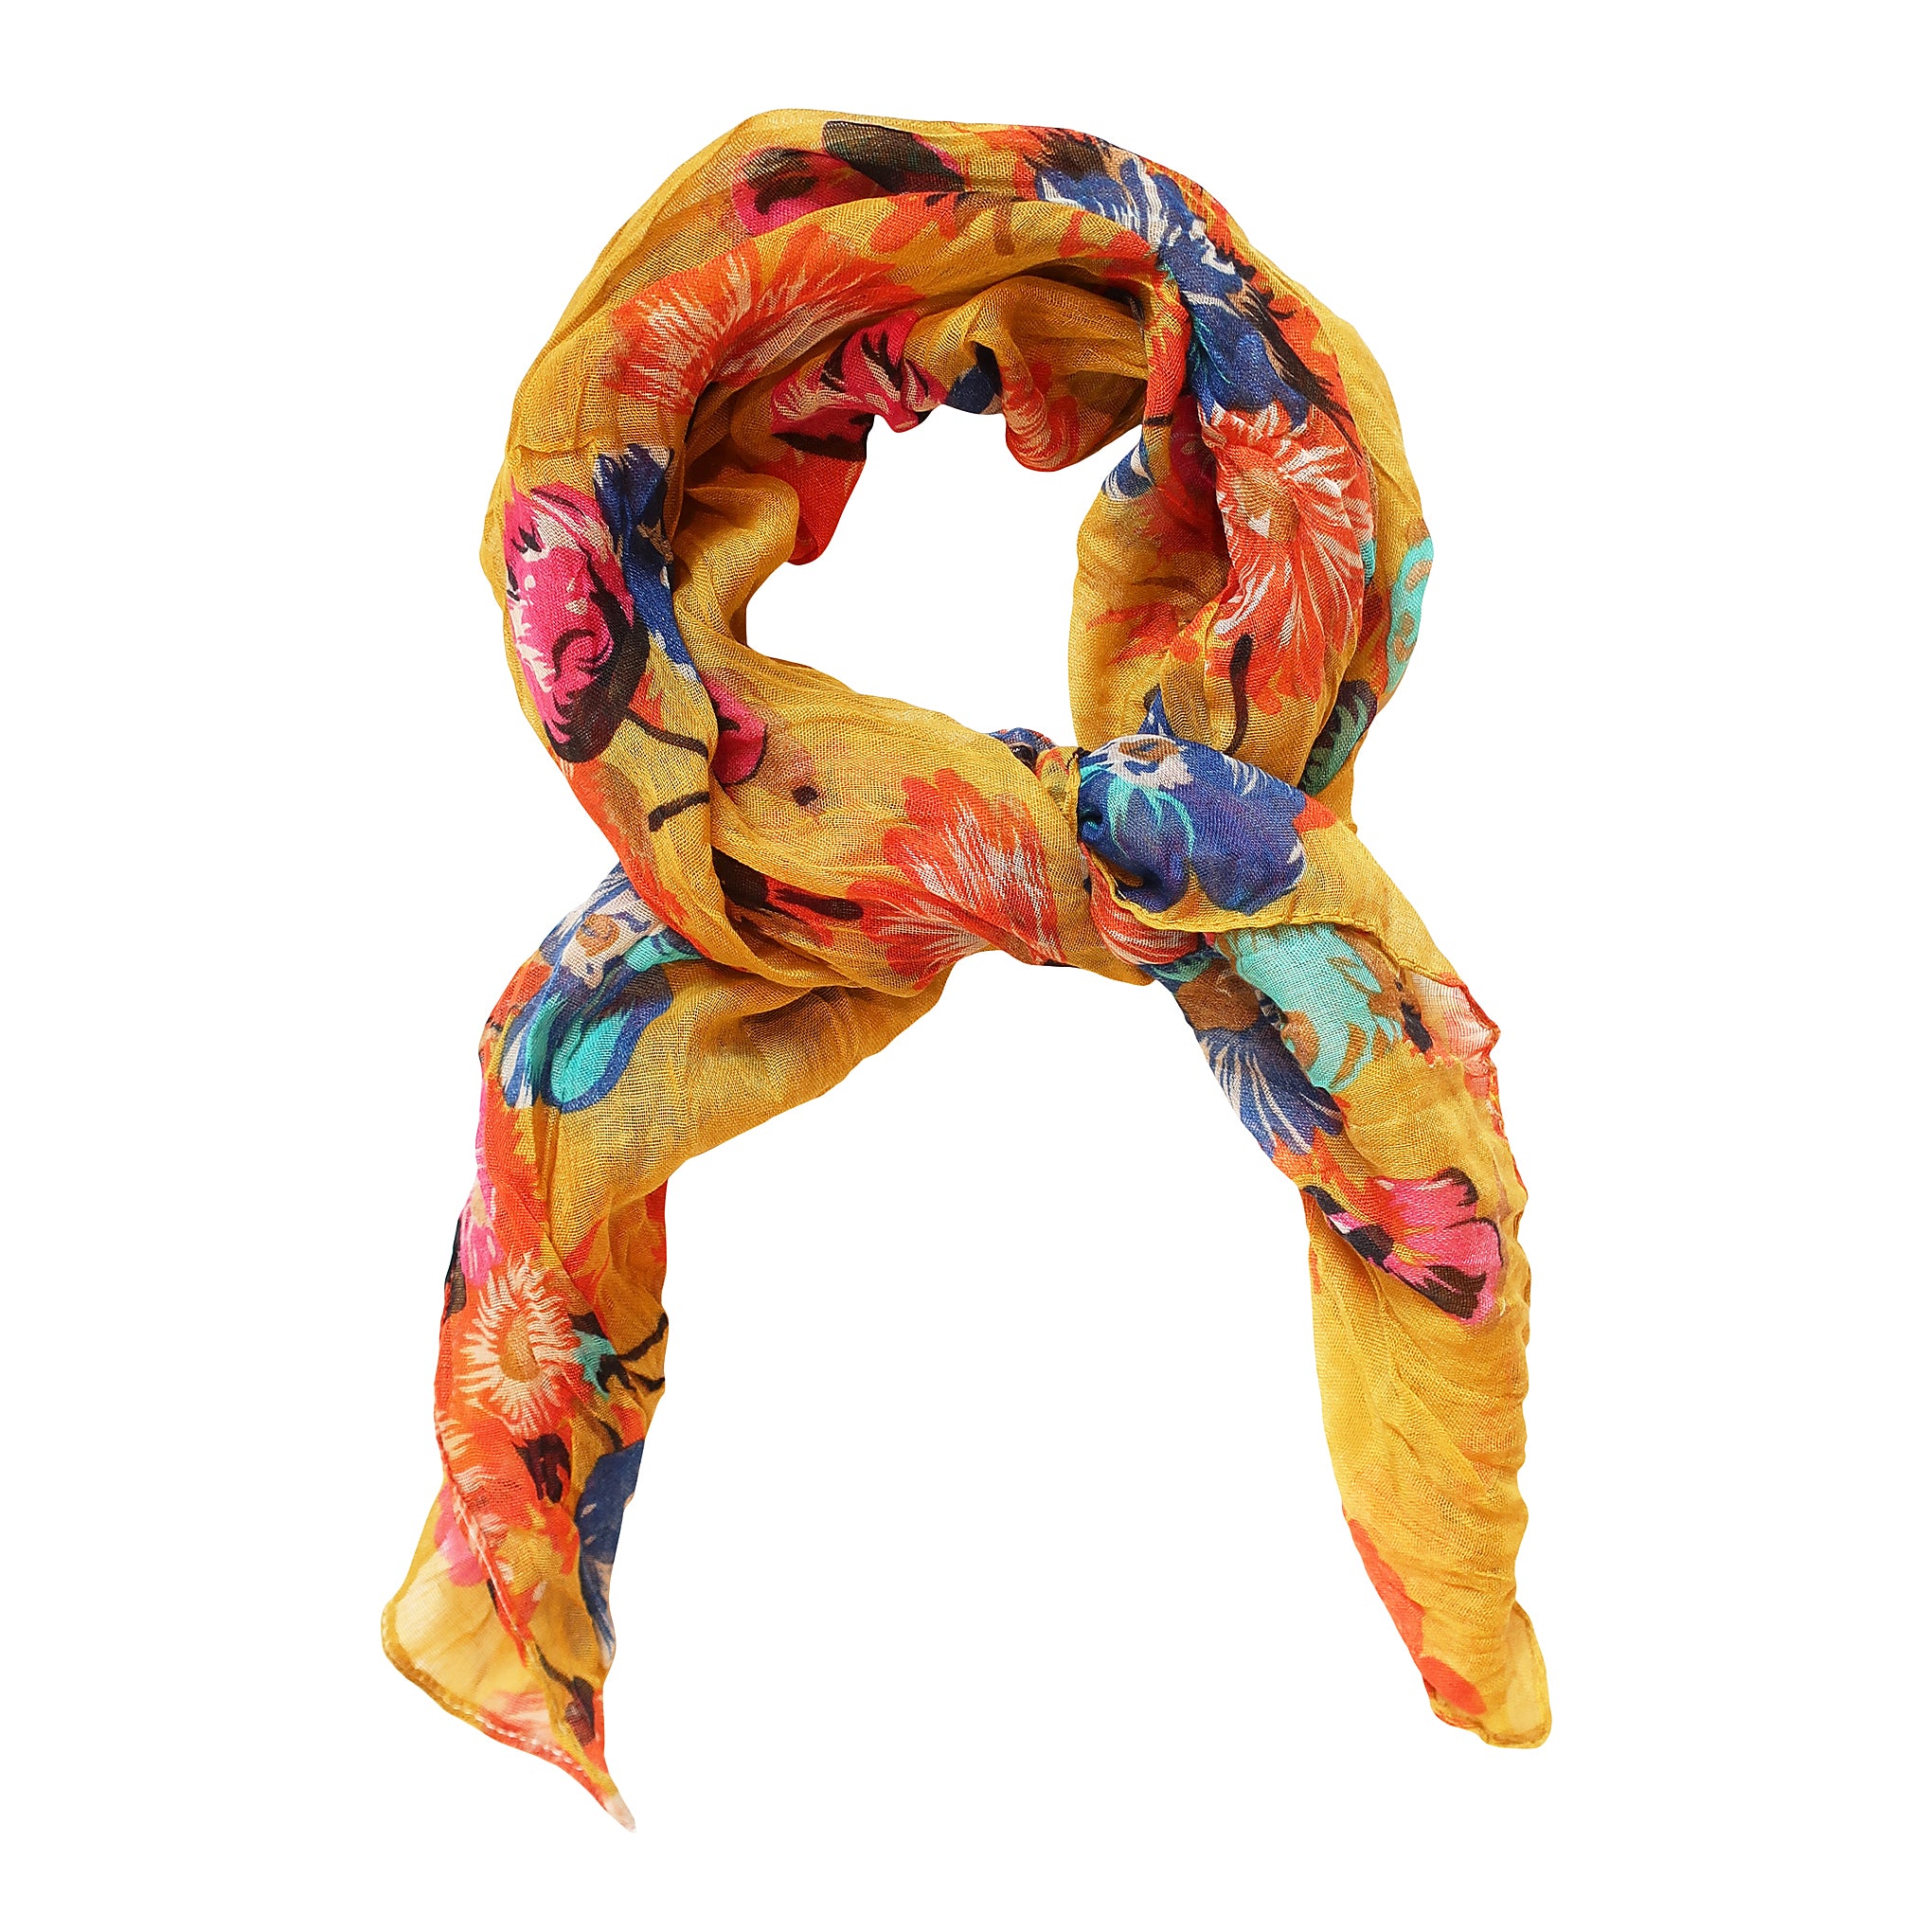 Blue Pacific French Flower Cotton Neckerchief Scarf in Mustard Yellow